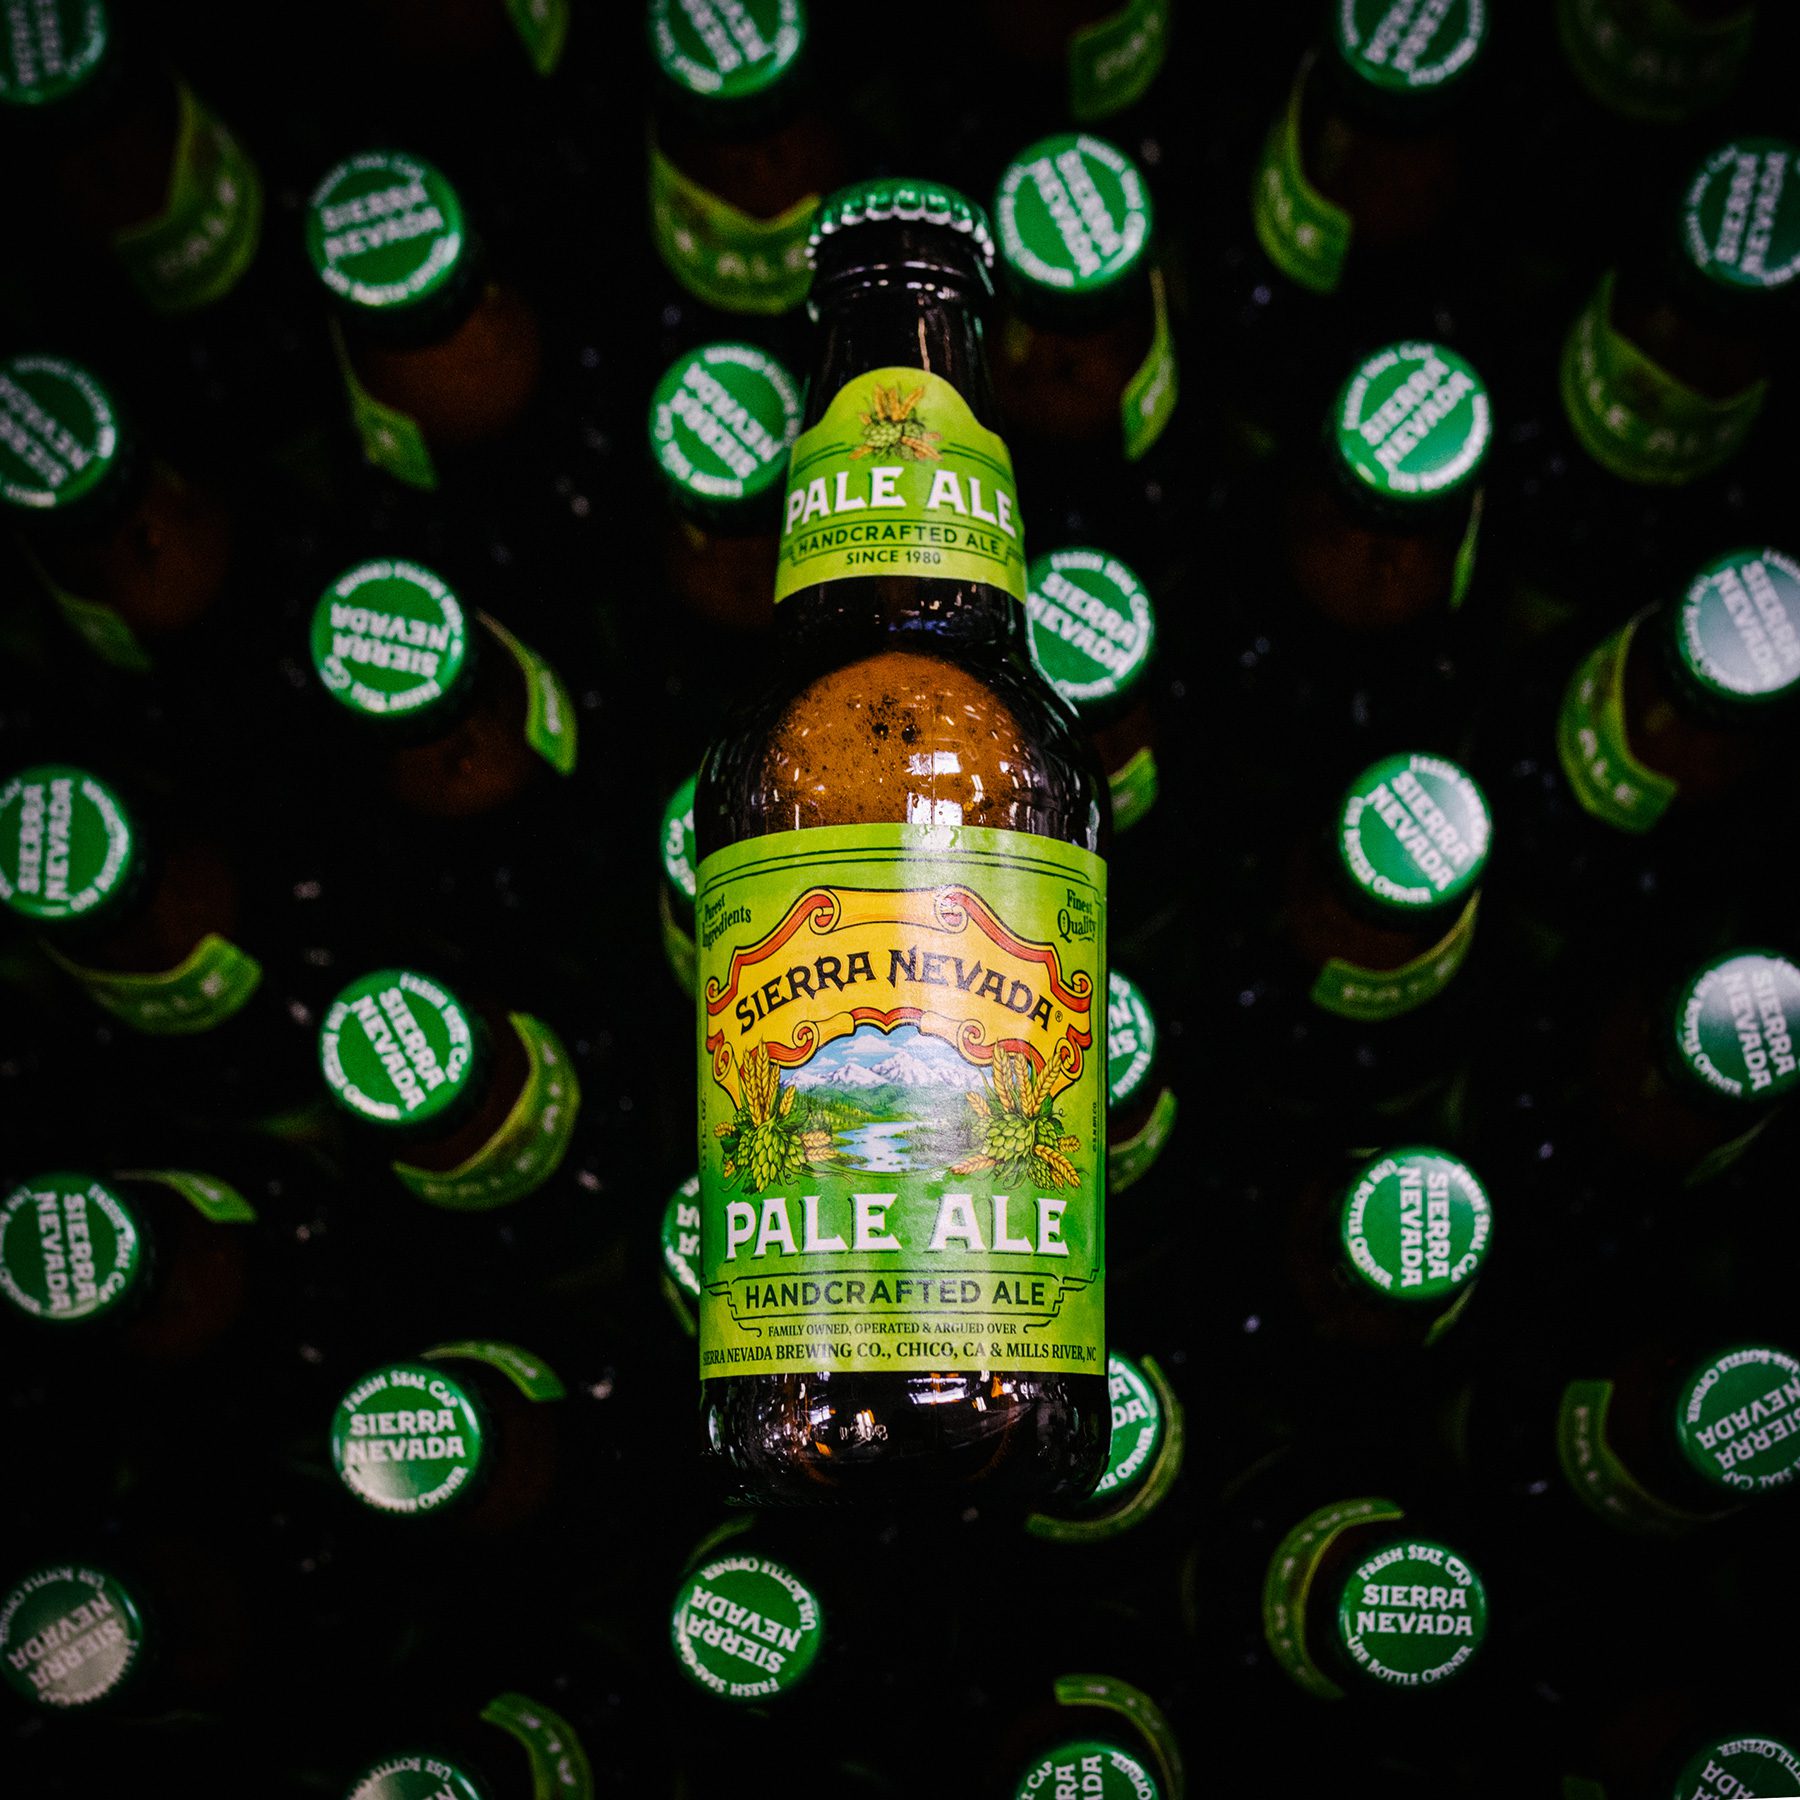 A bottle of Sierra Nevada Pale Ale crowdsurfing atop more beer bottles